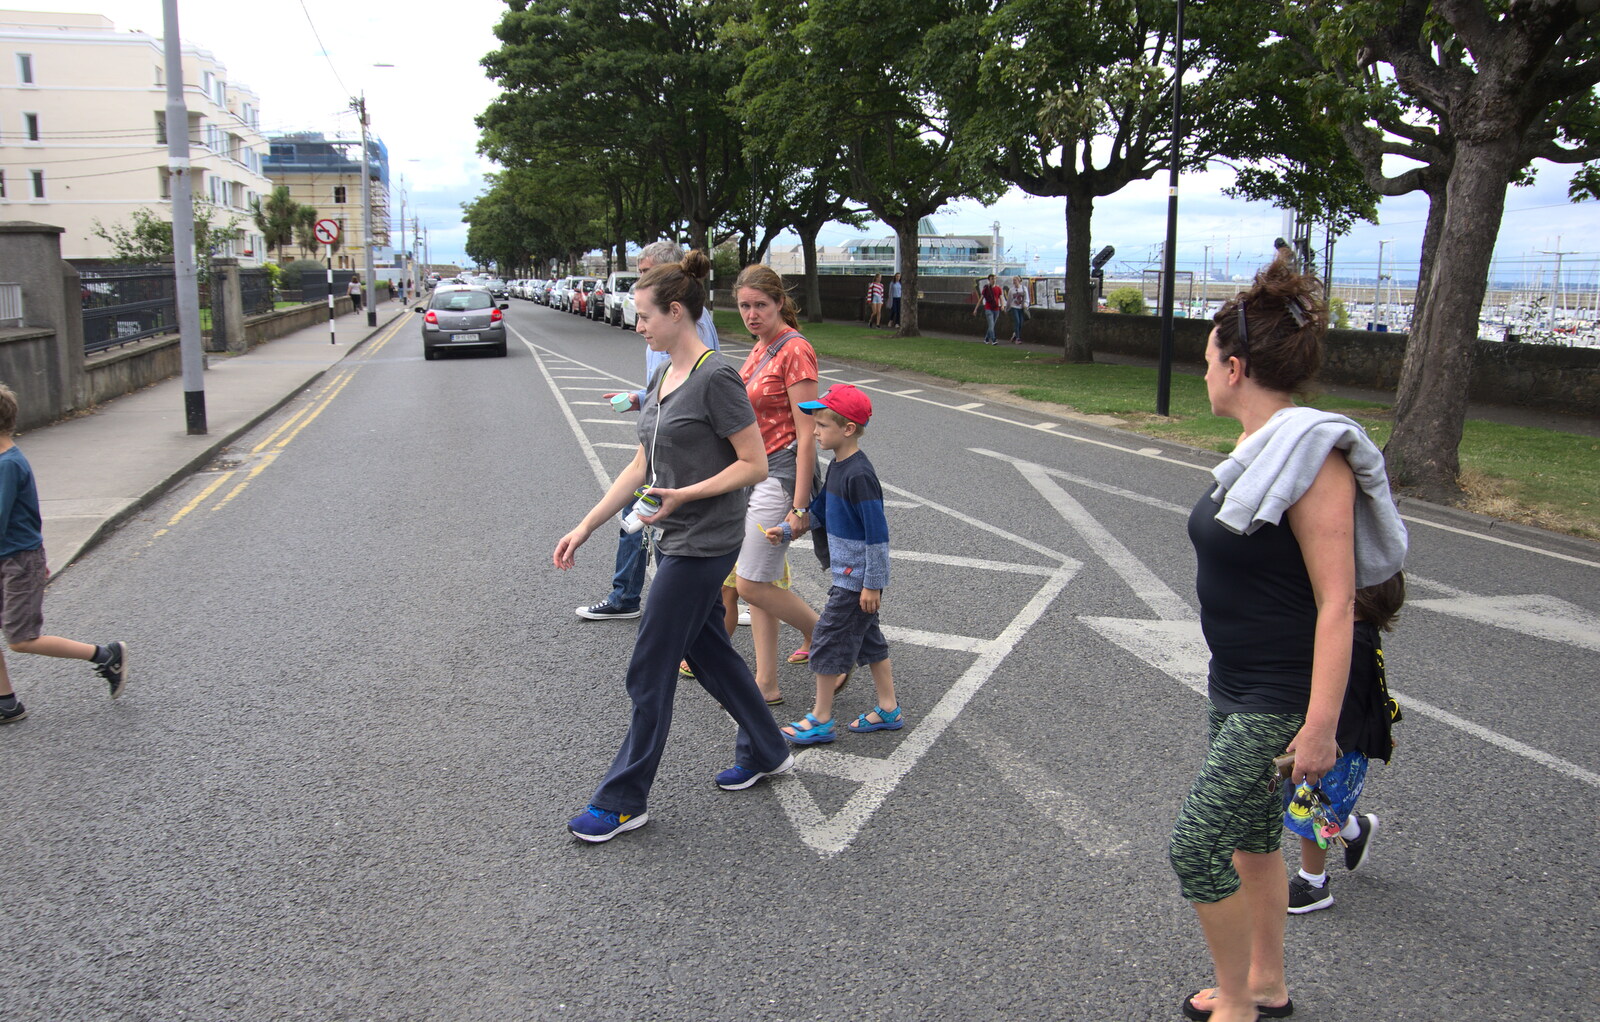 It's not quite Abbey Road from The Dún Laoghaire 10k Run, County Dublin, Ireland - 6th August 2018